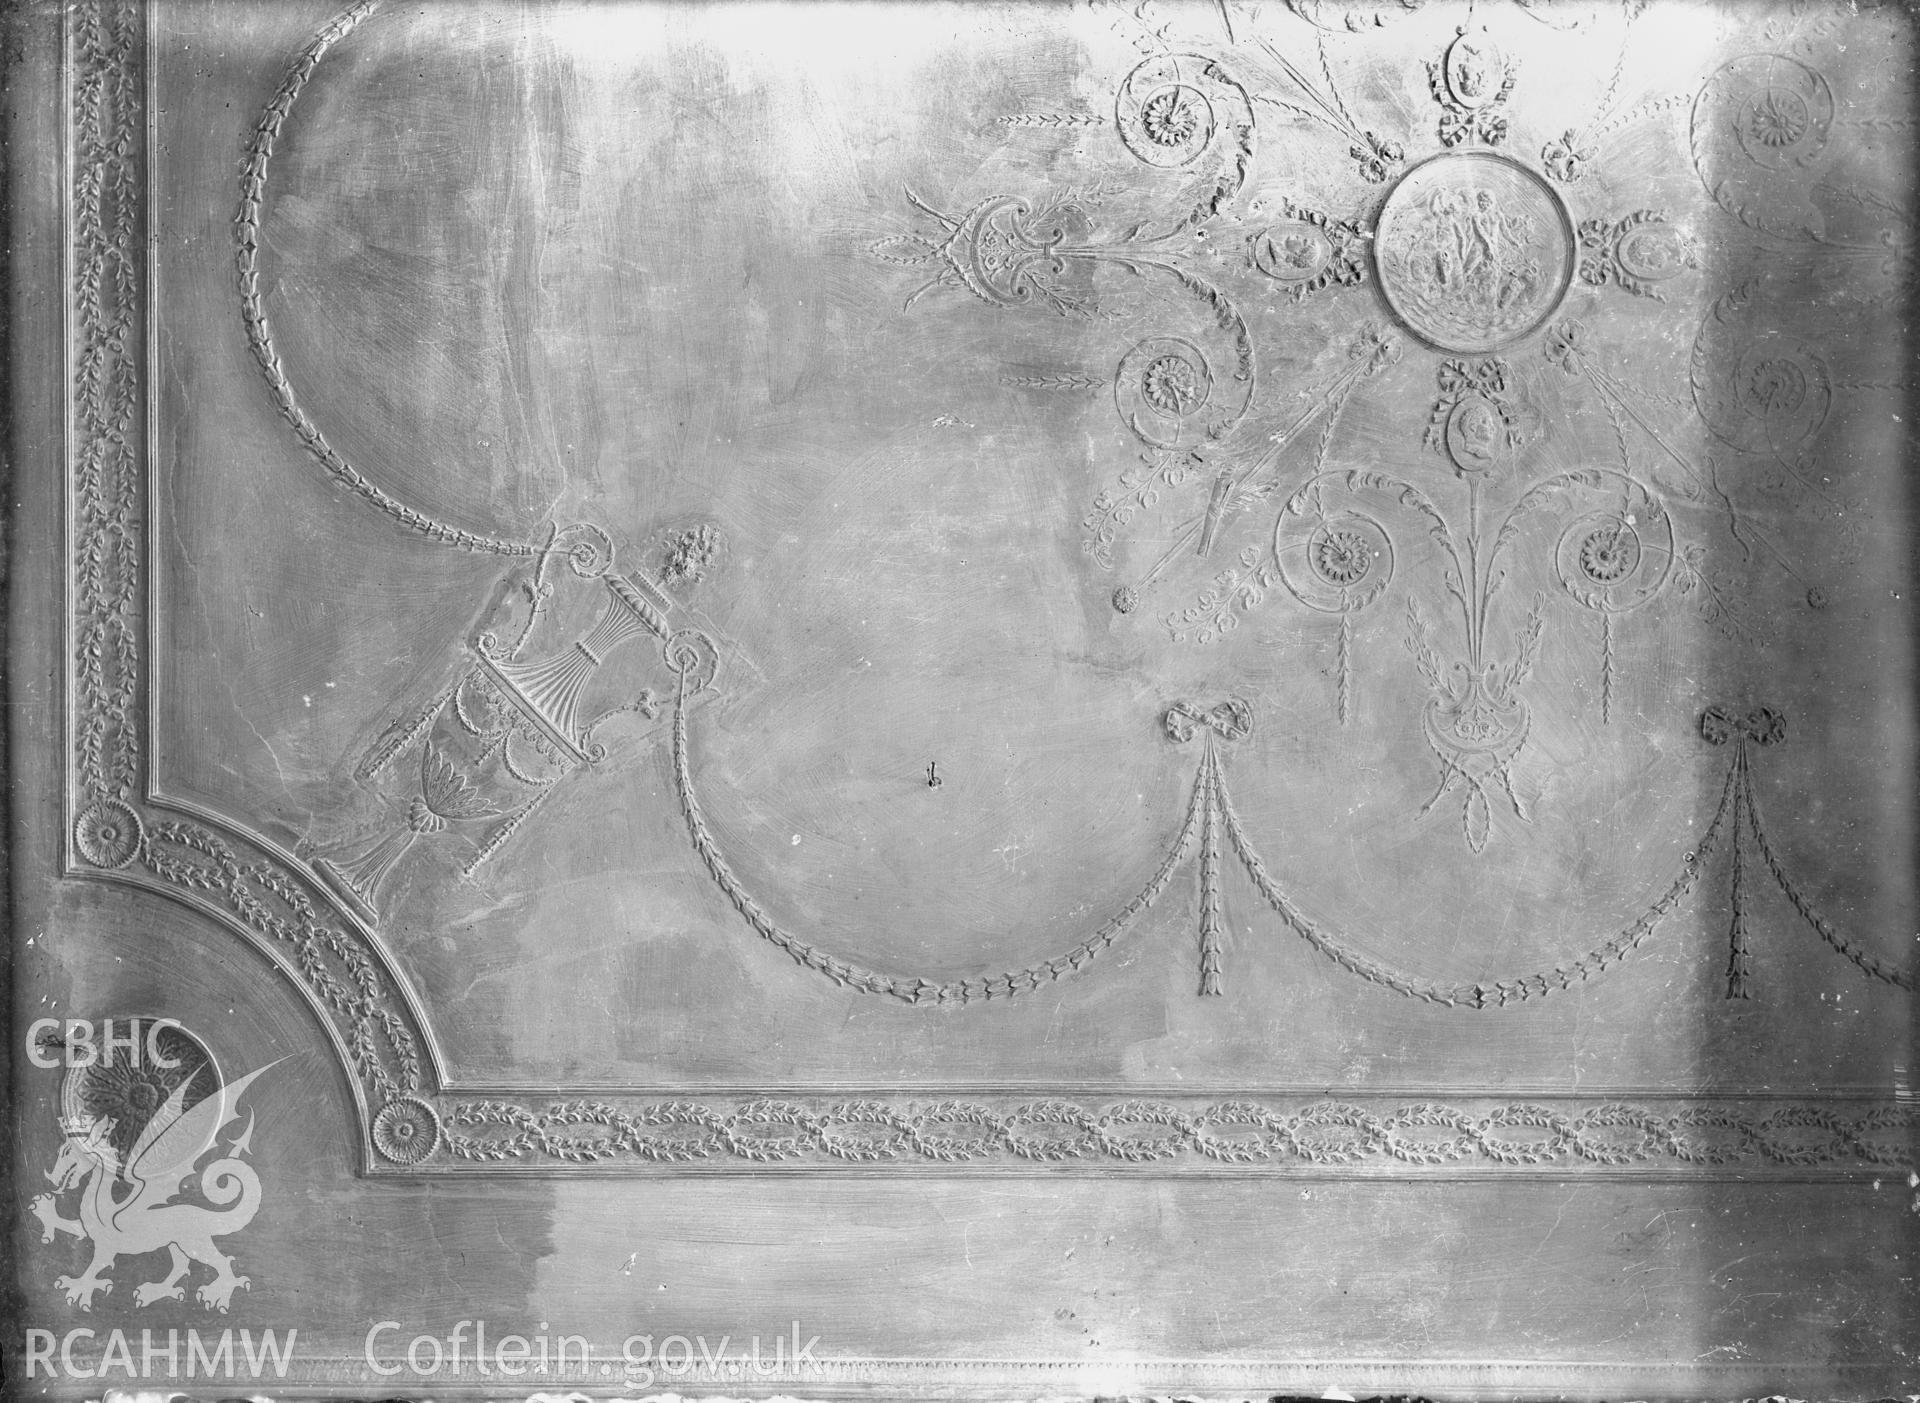 Black and white glass negative showing decorative plasterwork on the ceiling of unidentified house.